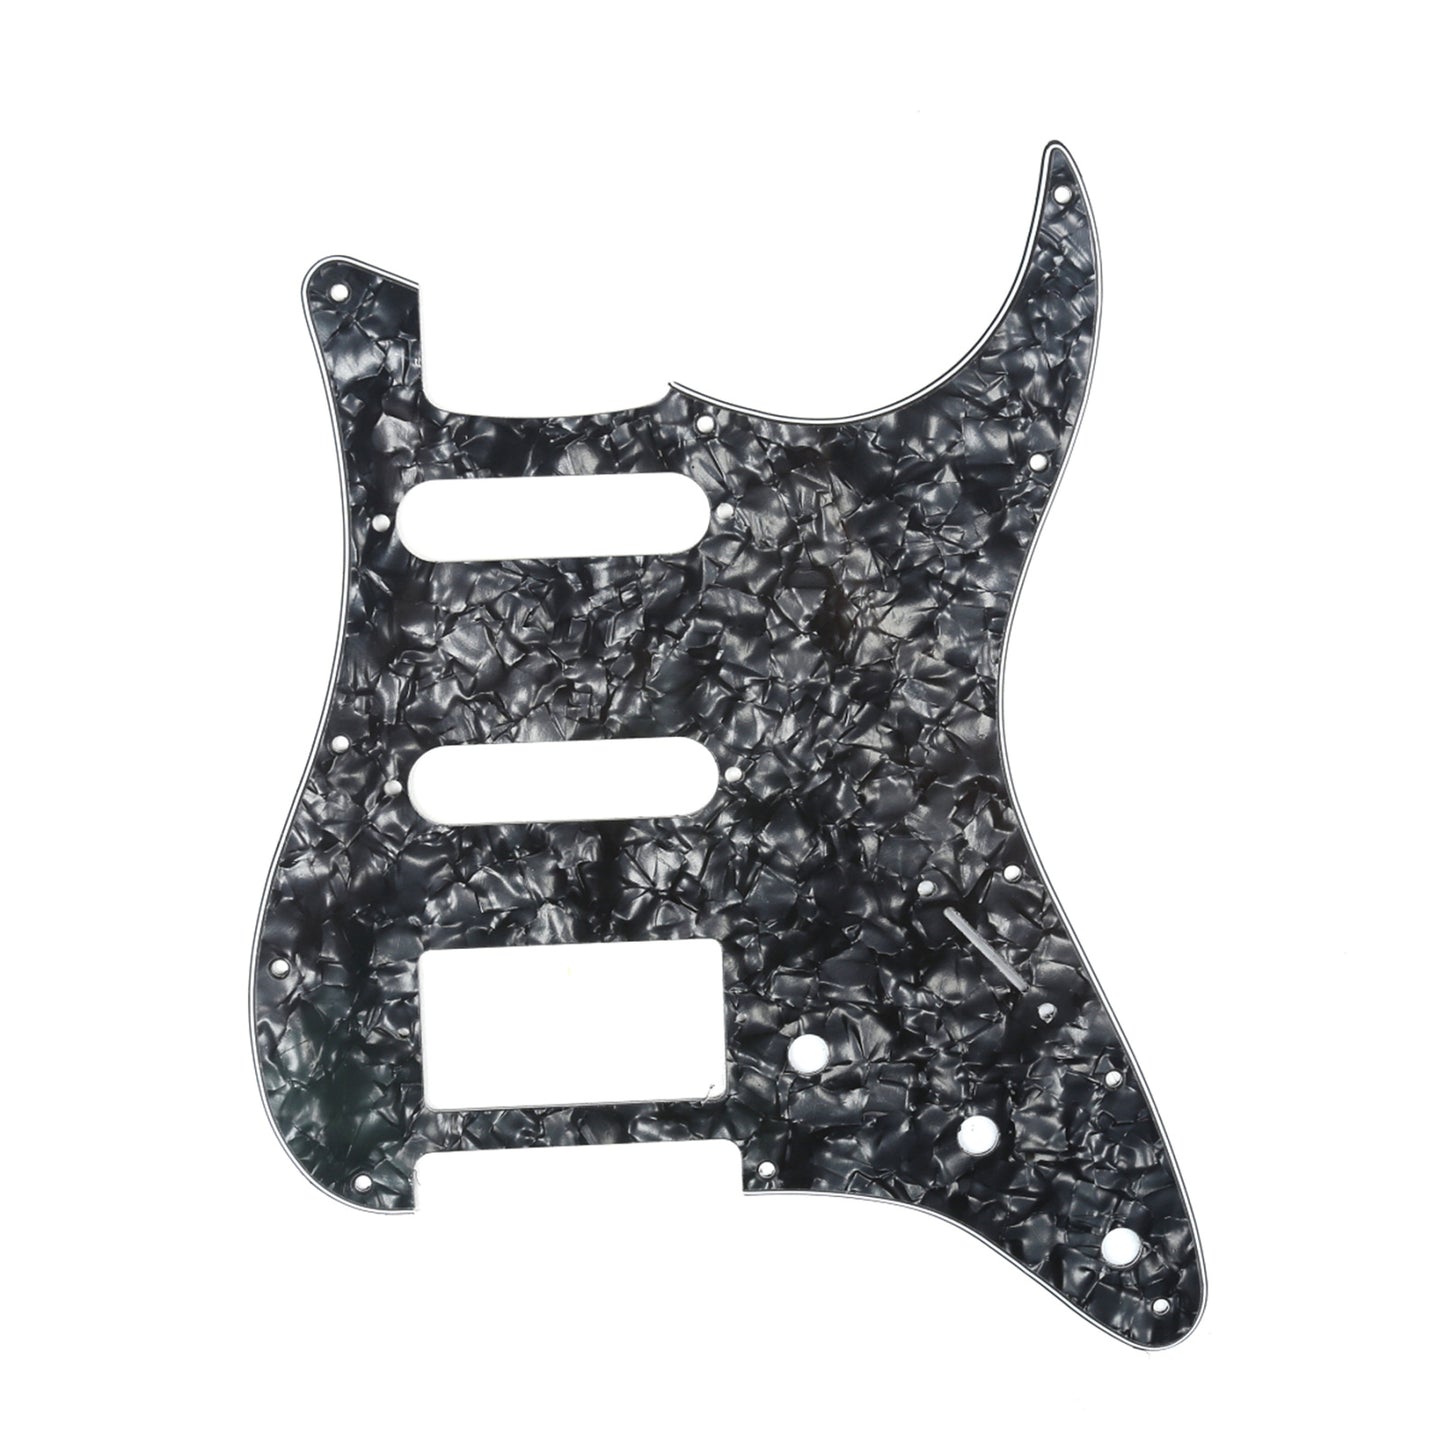 Musiclily HSS 11 Hole Guitar Strat Pickguard for Fender USA/Mexican Made Standard Stratocaster Modern Style,4Ply Black Pearl